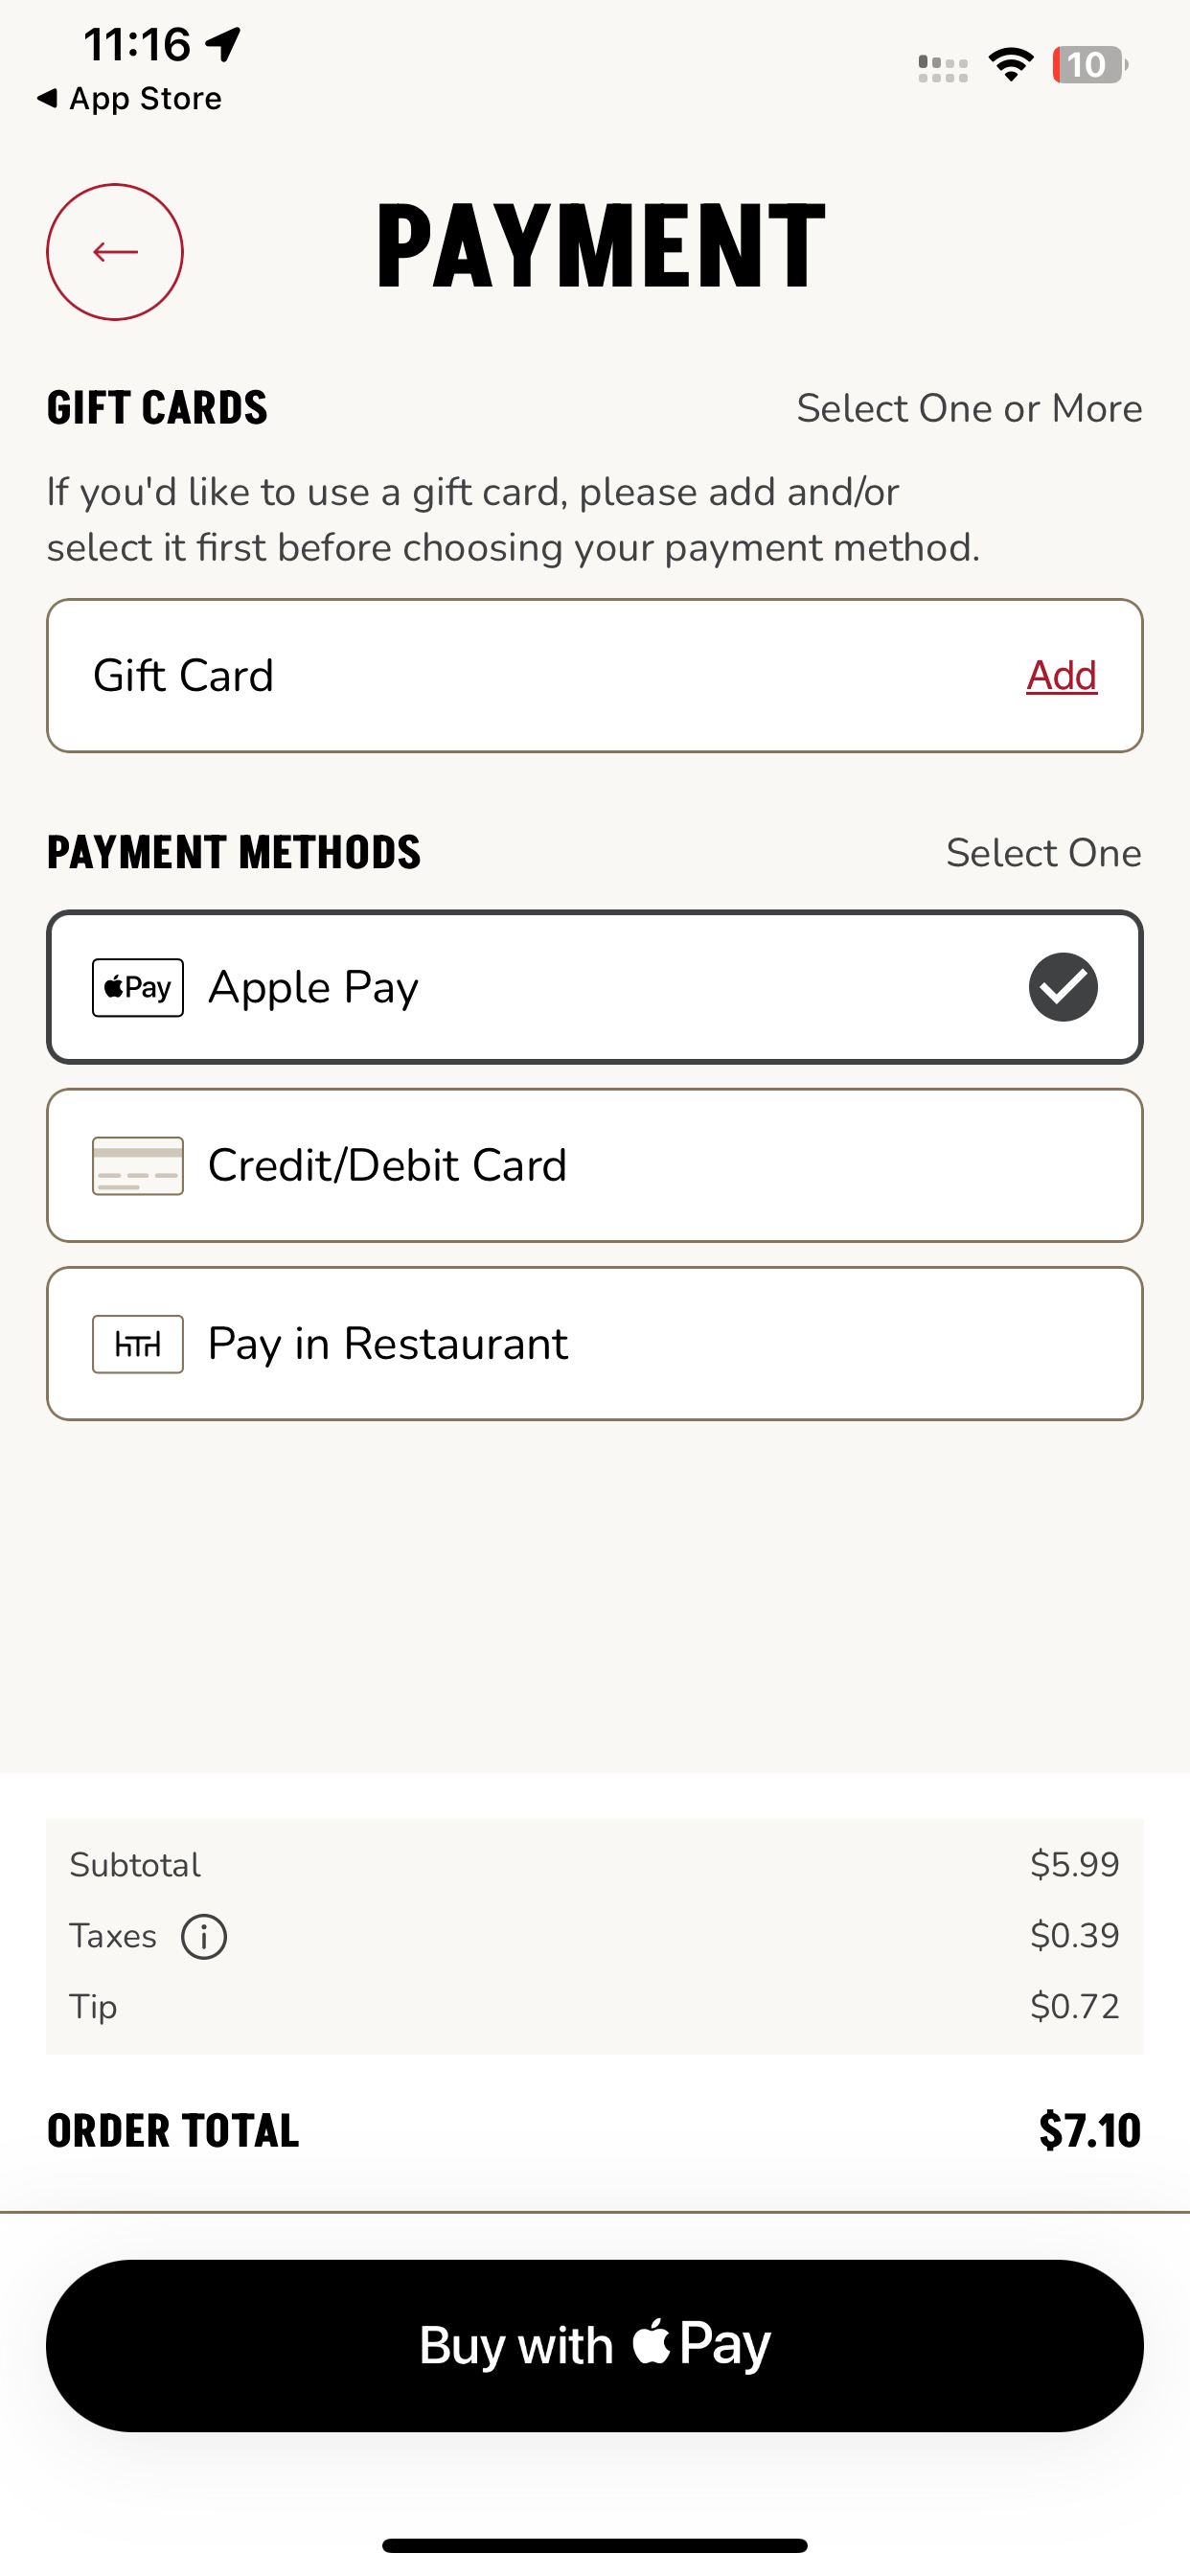 Applebee's accepts Apple Pay in its iOS app.